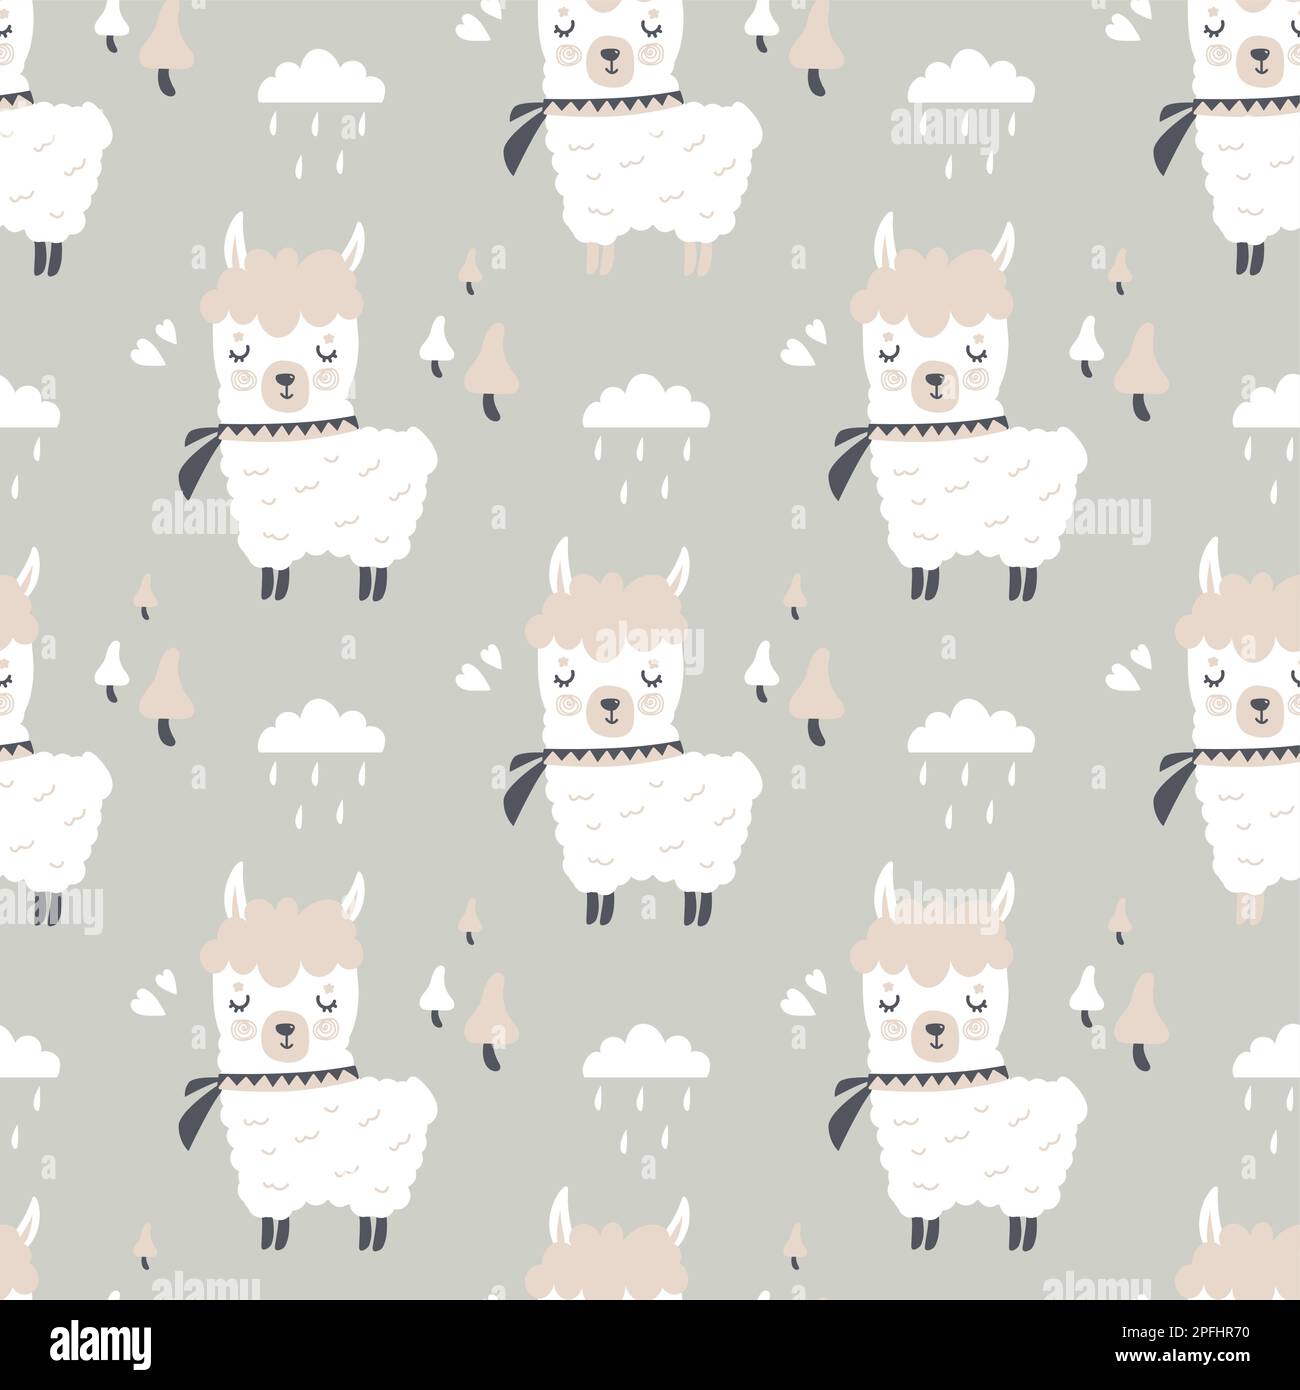 Seamless pattern with cute doodle llamas. Texture background in scandinavian style. Poster, childish print template. Vector illustration Stock Vector